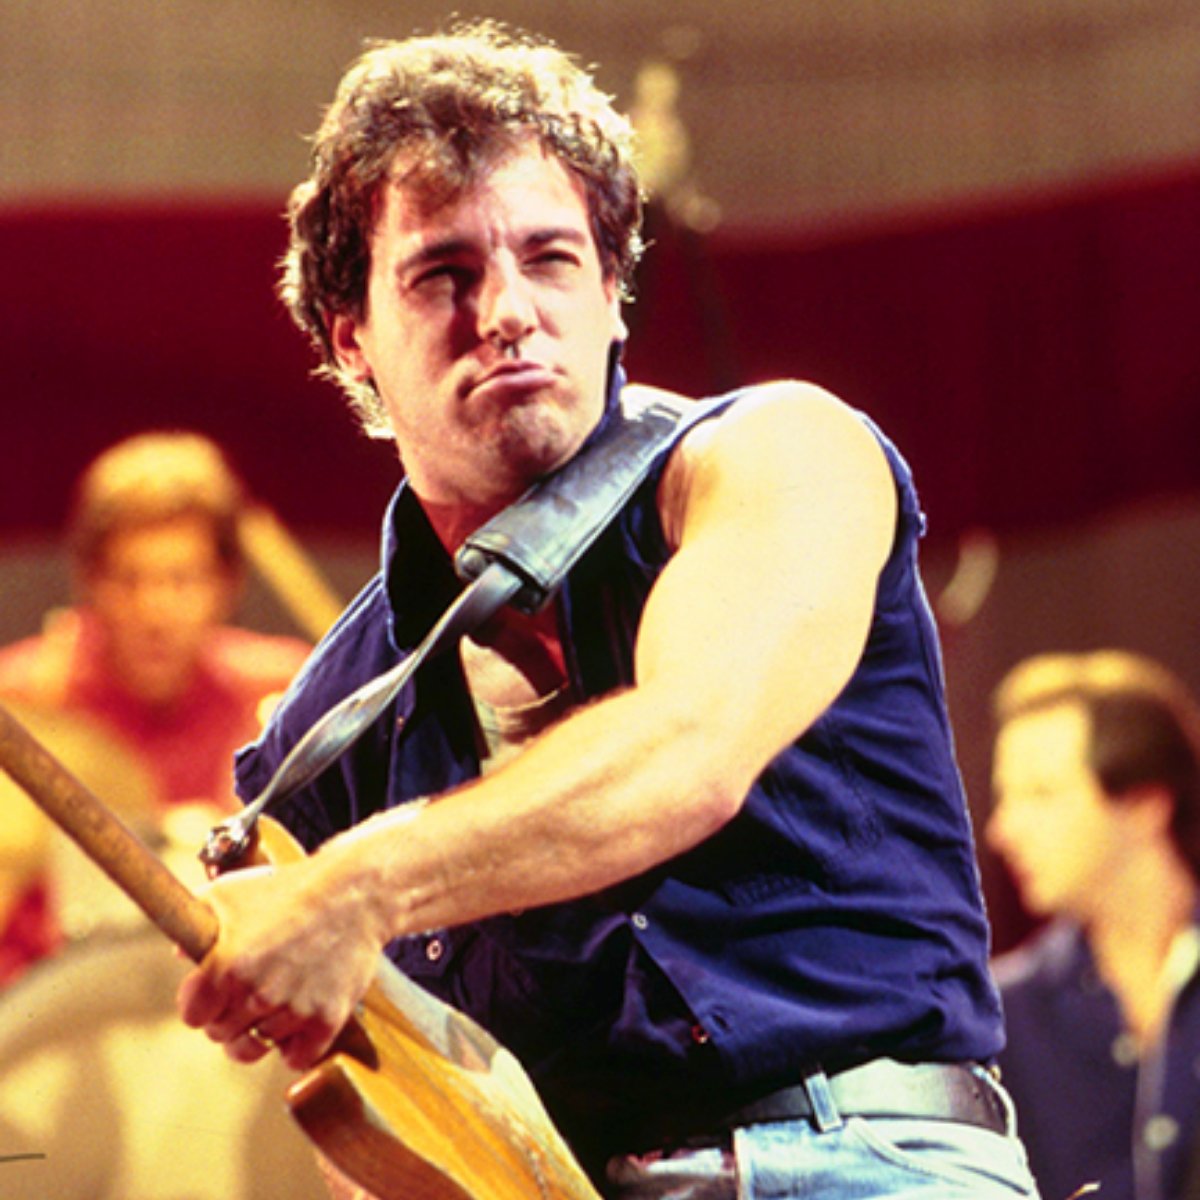 Bruce Springsteen playing guitar on stage circa 1980s